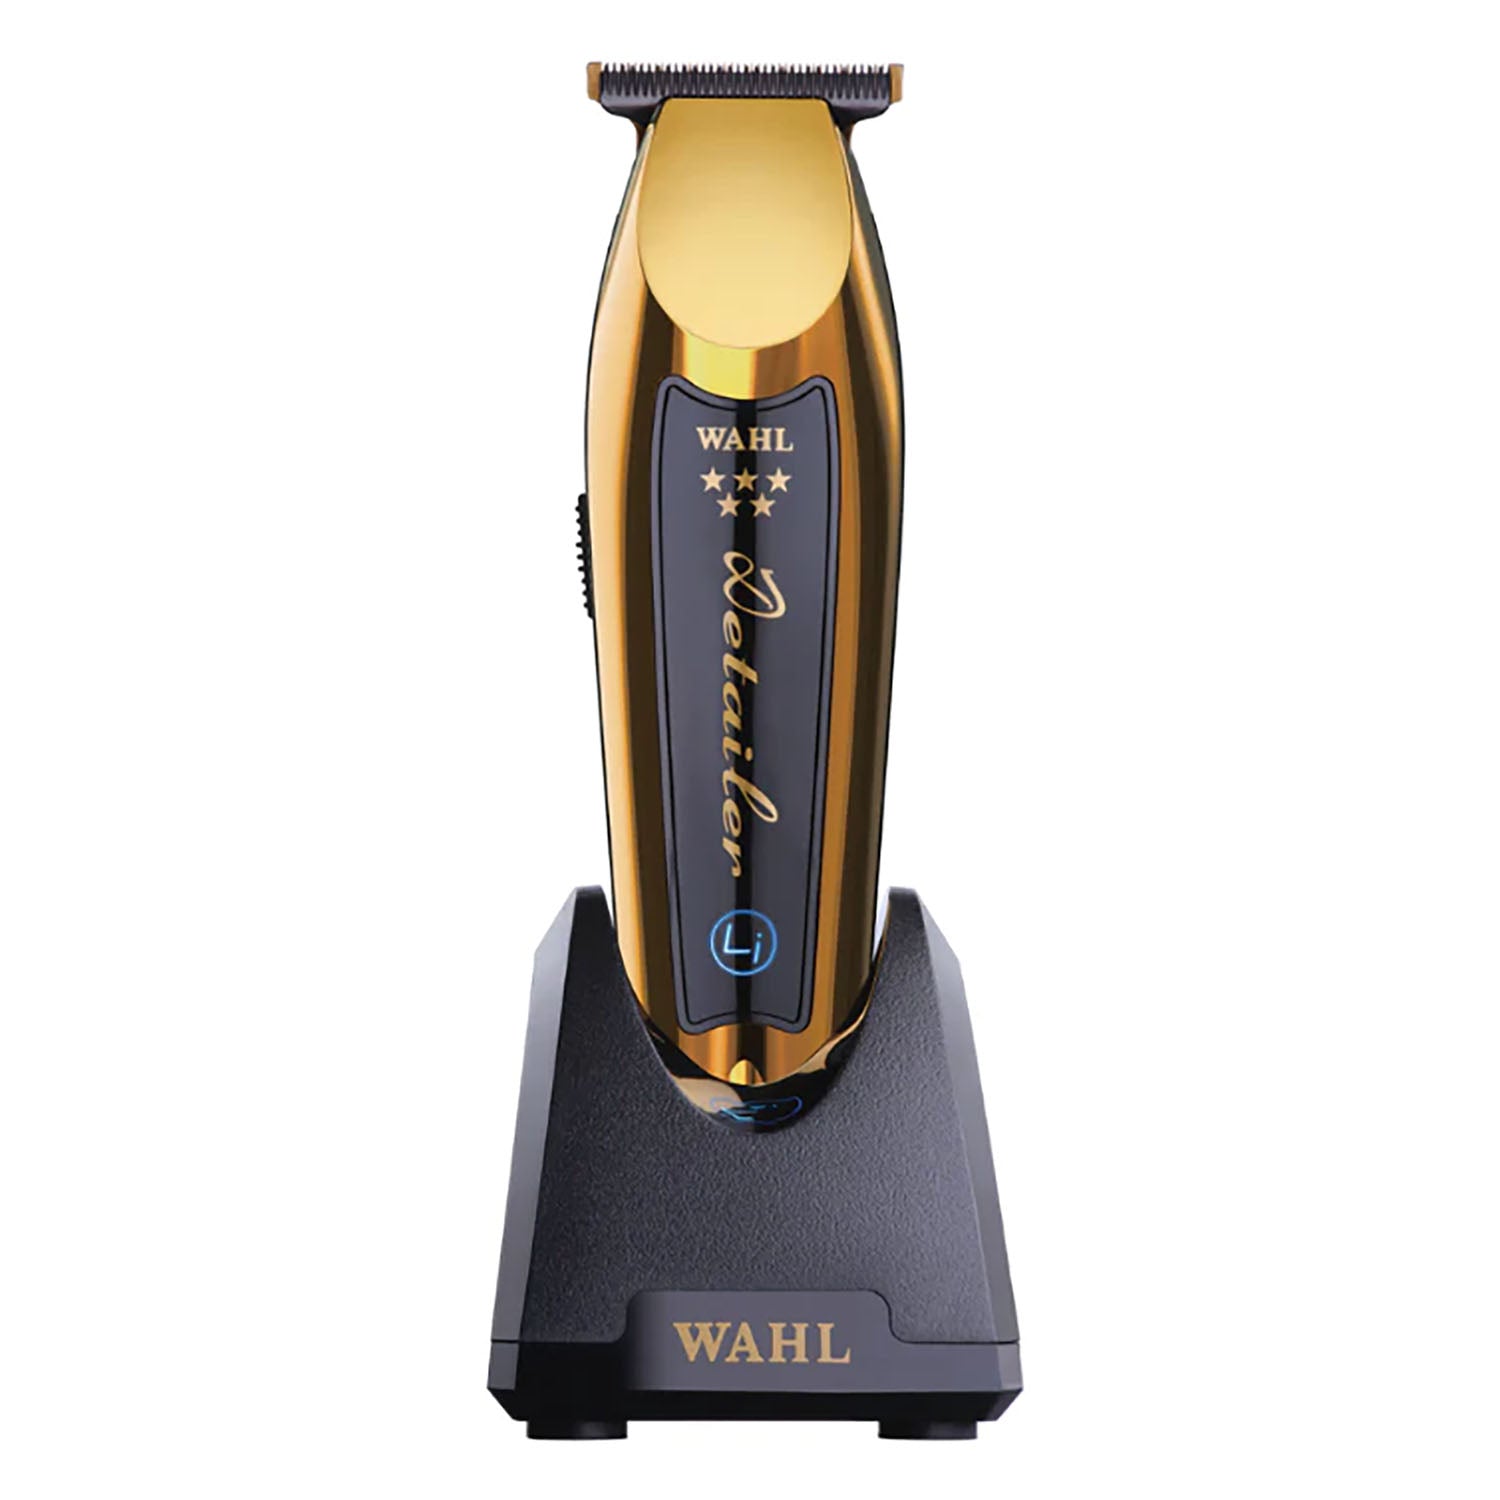 Wahl 5 Star Cord/Cordless Hair & Beard Trimmer Detailer Gold with Charging Stand - #56444